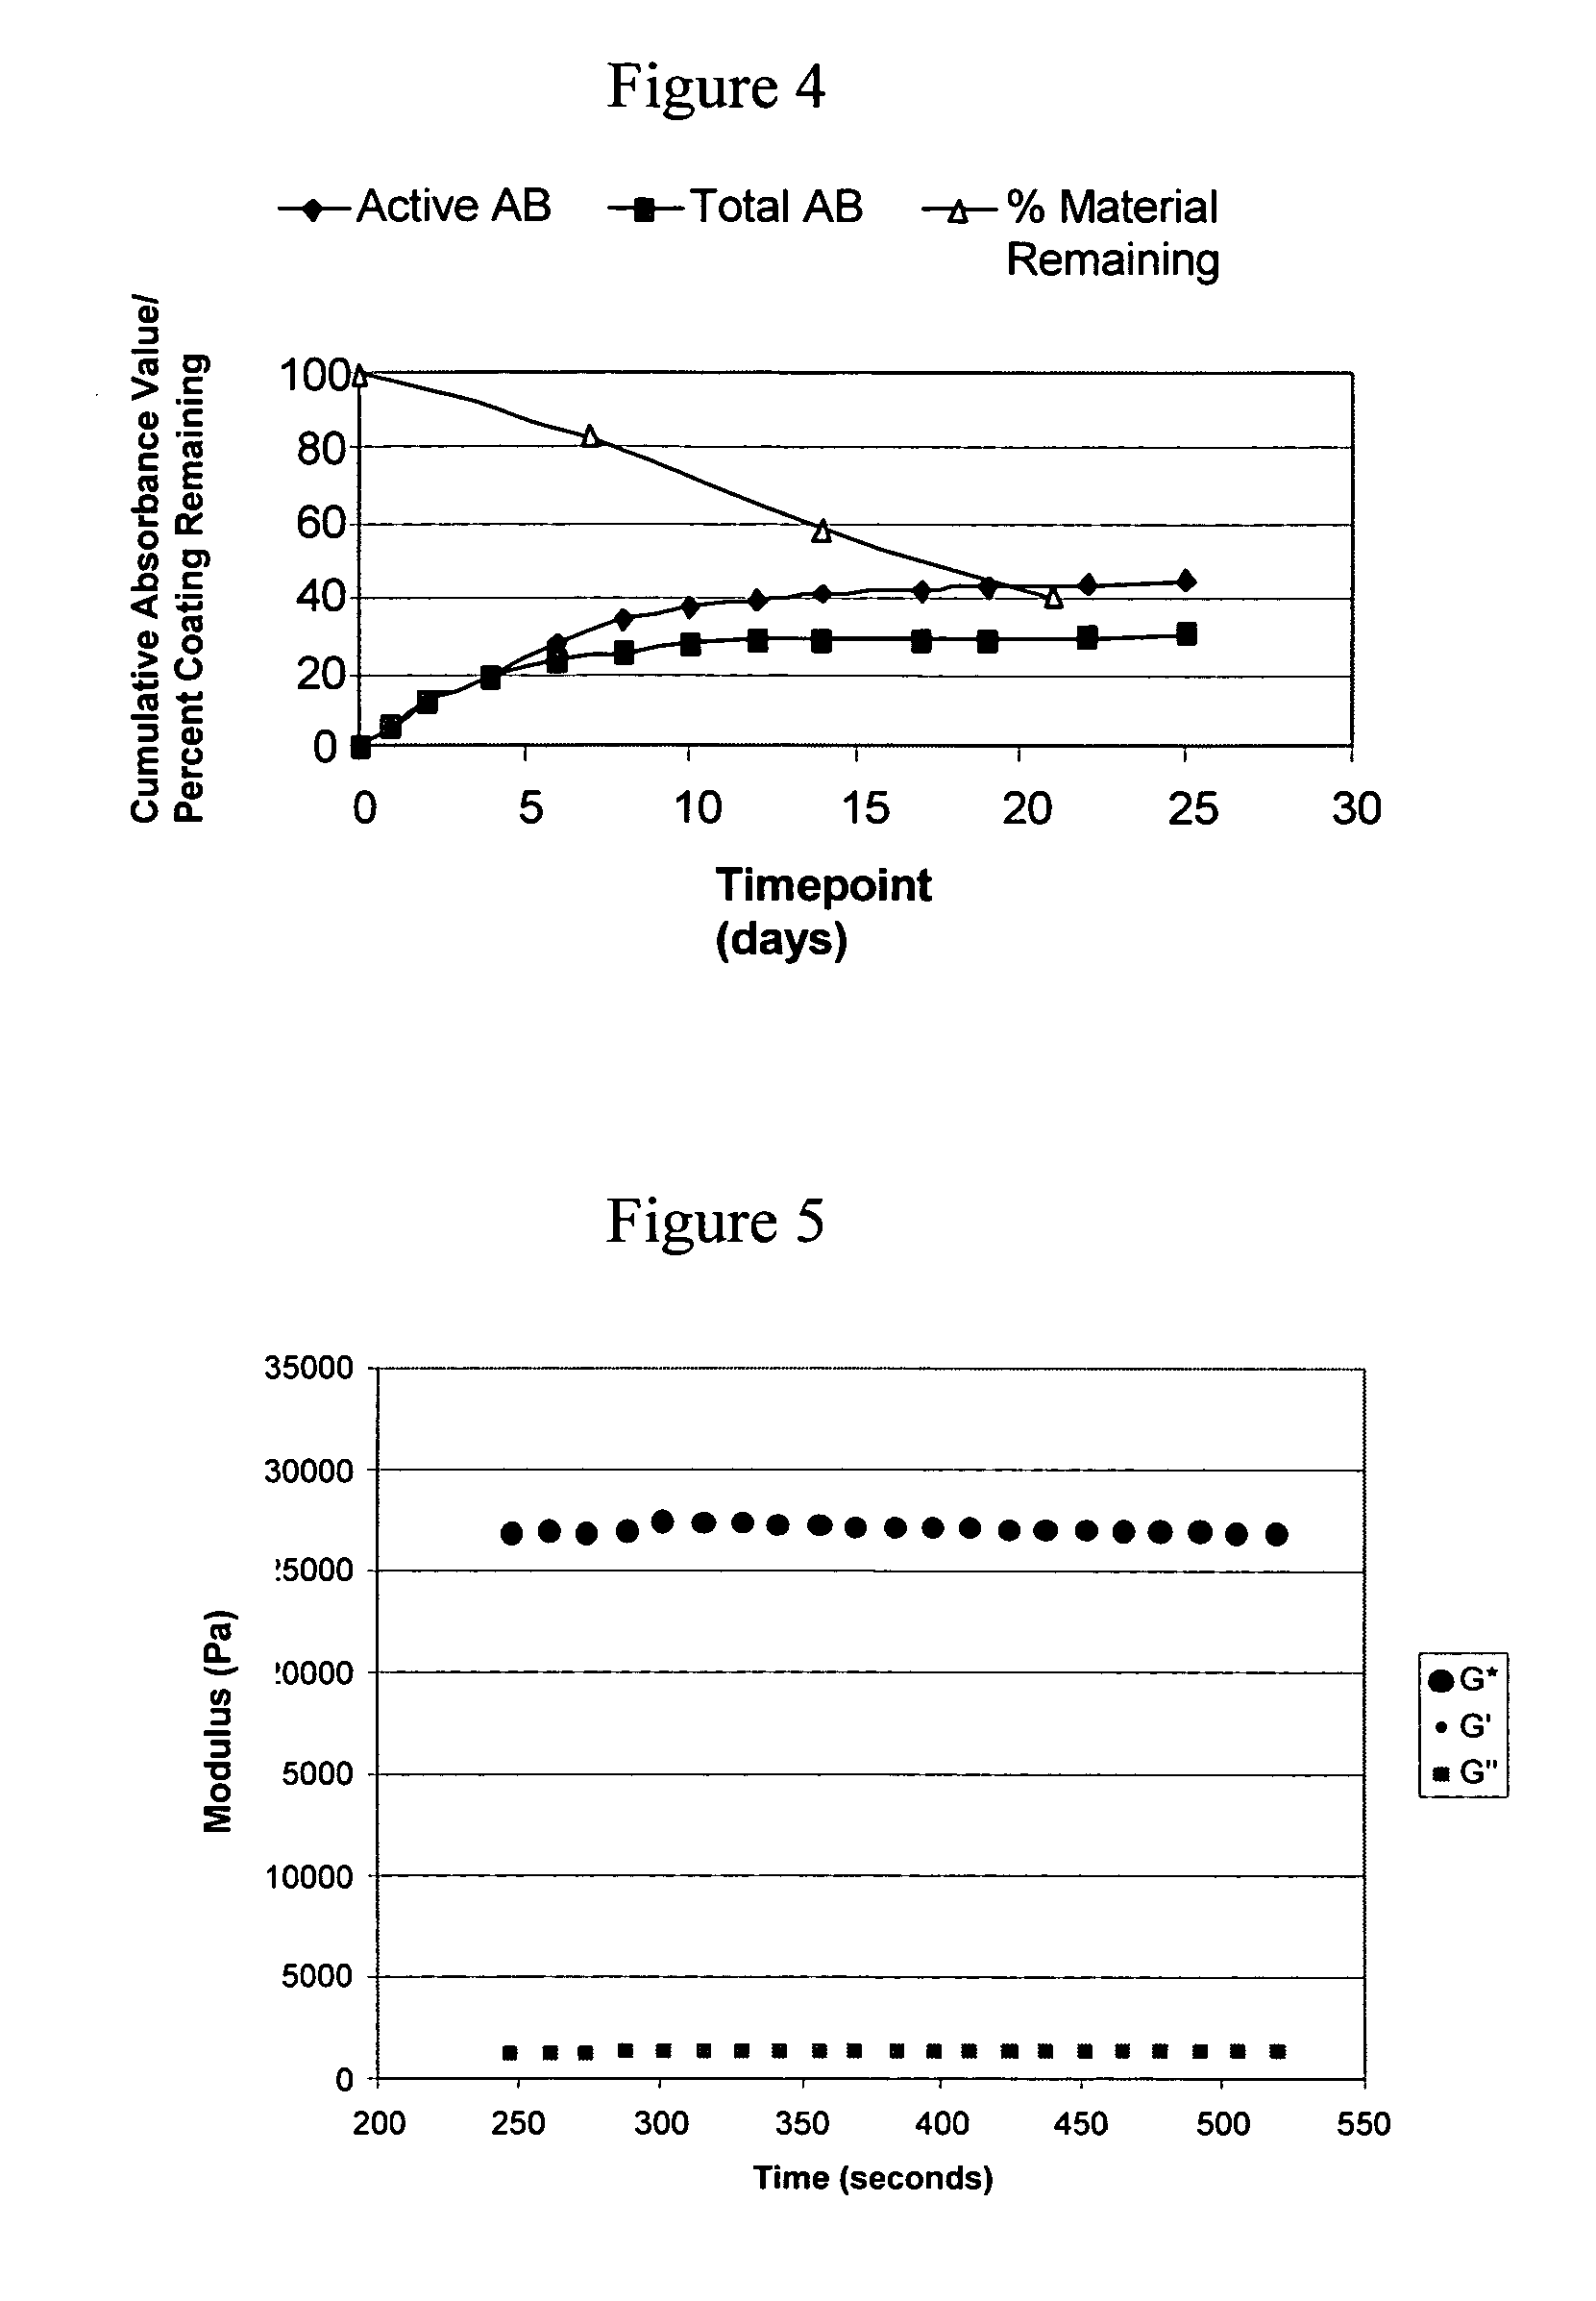 In VIVO formed matrices including natural biodegradale polysaccharides and ophthalmic uses thereof